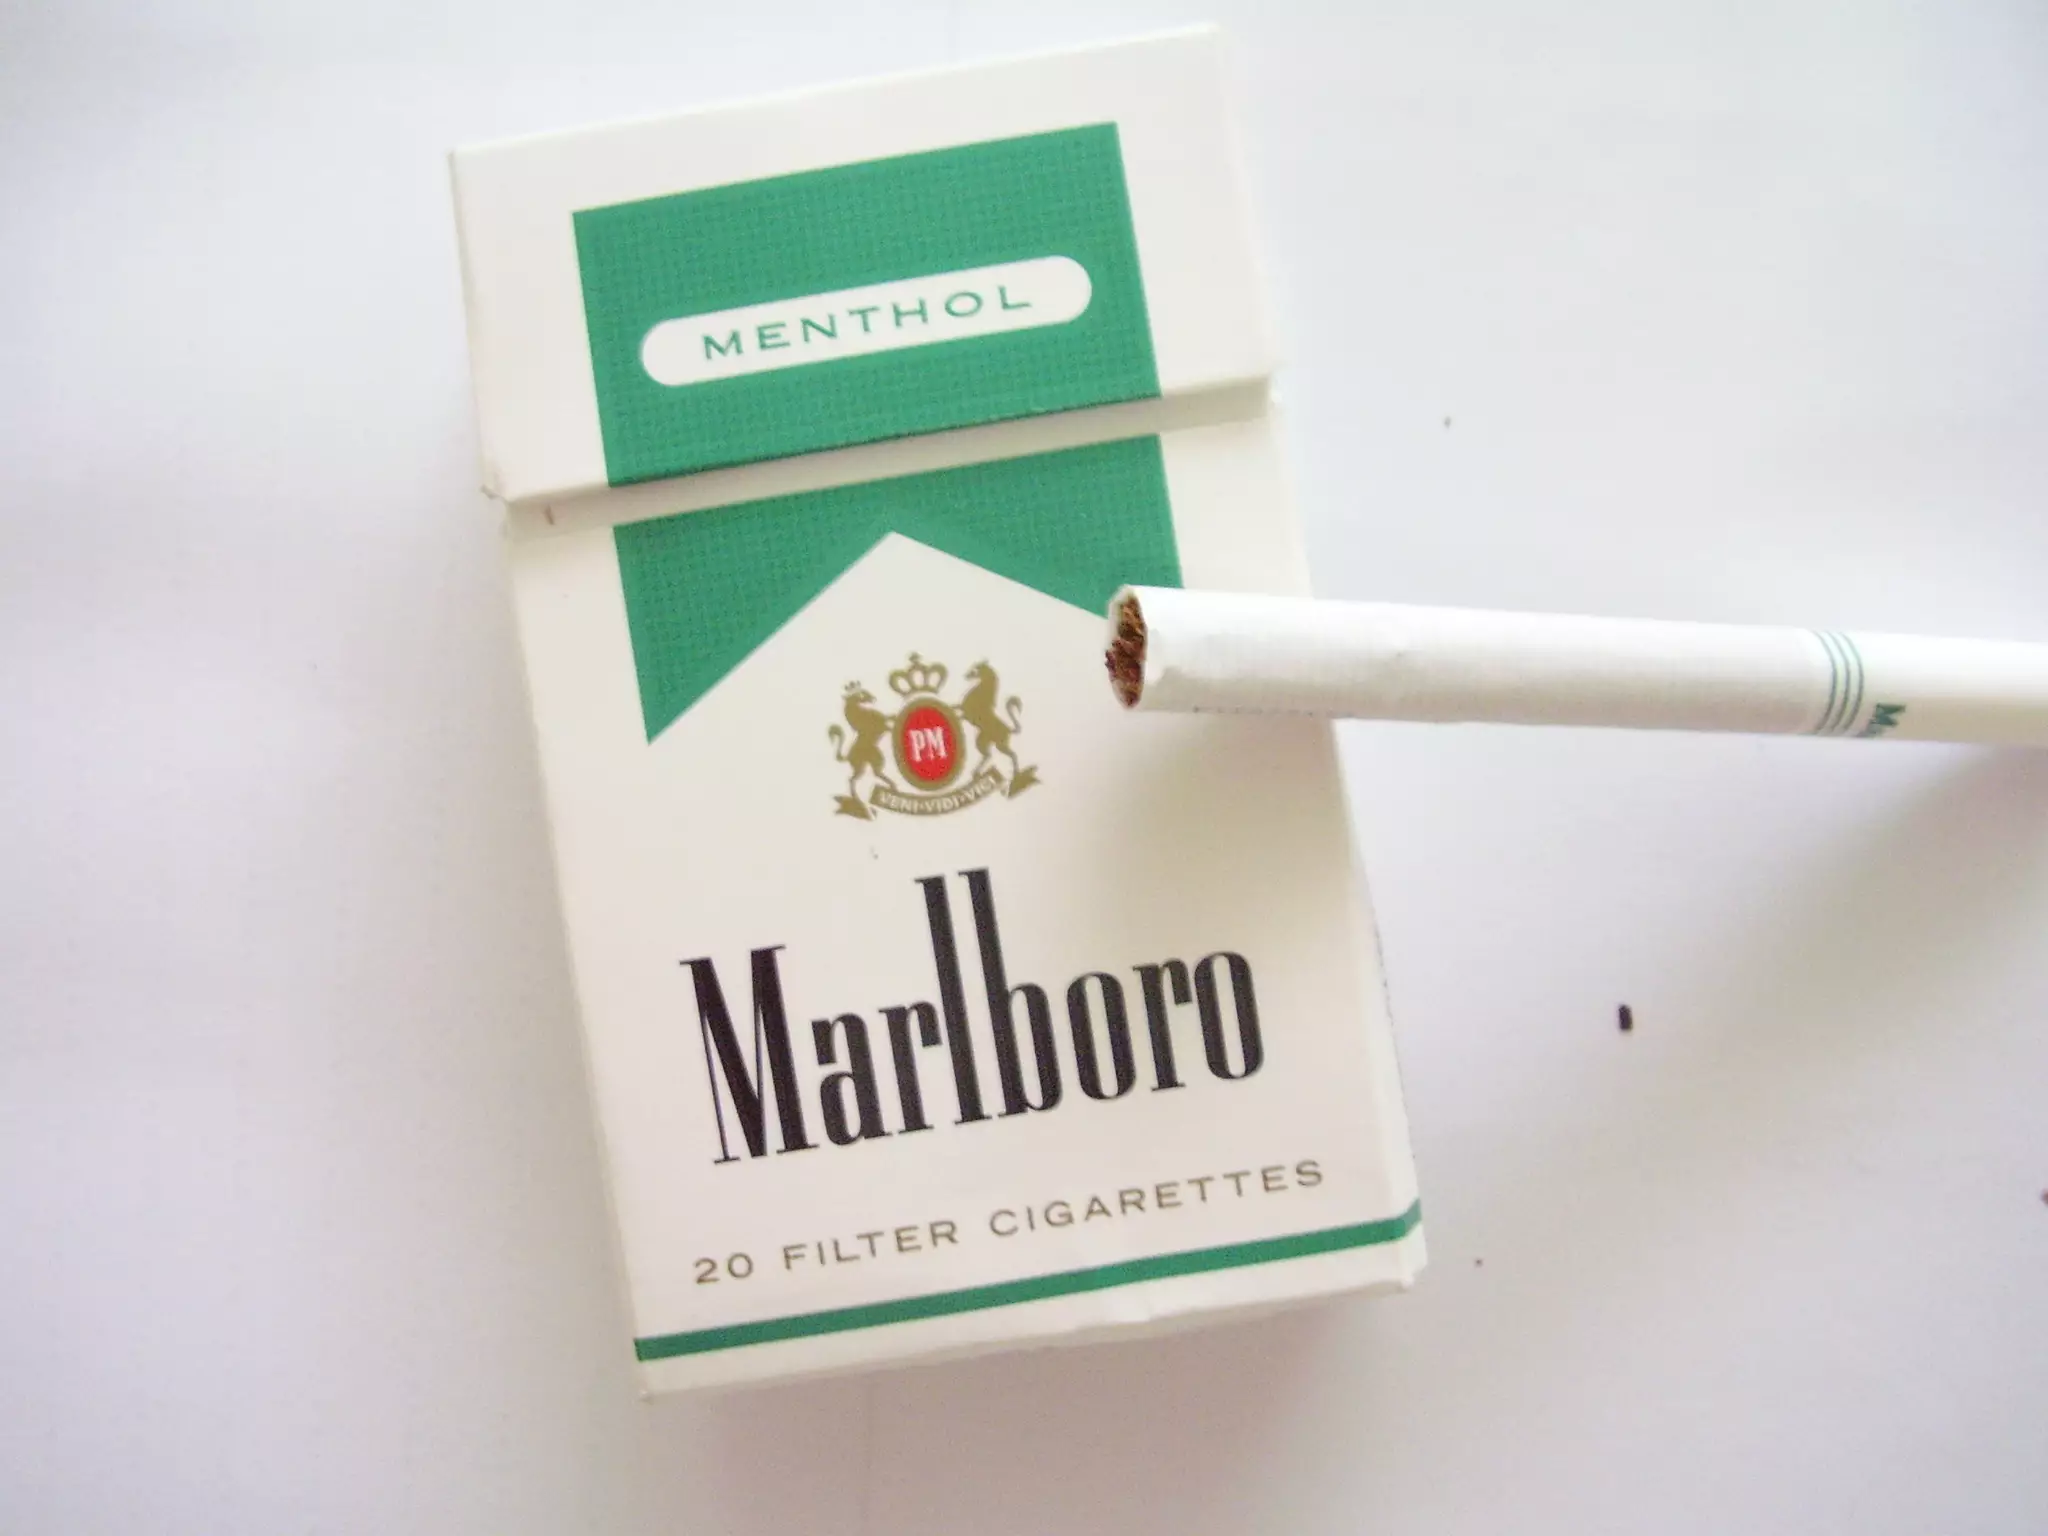 Menthol cigarettes will be banned from 20th May, 2020 (